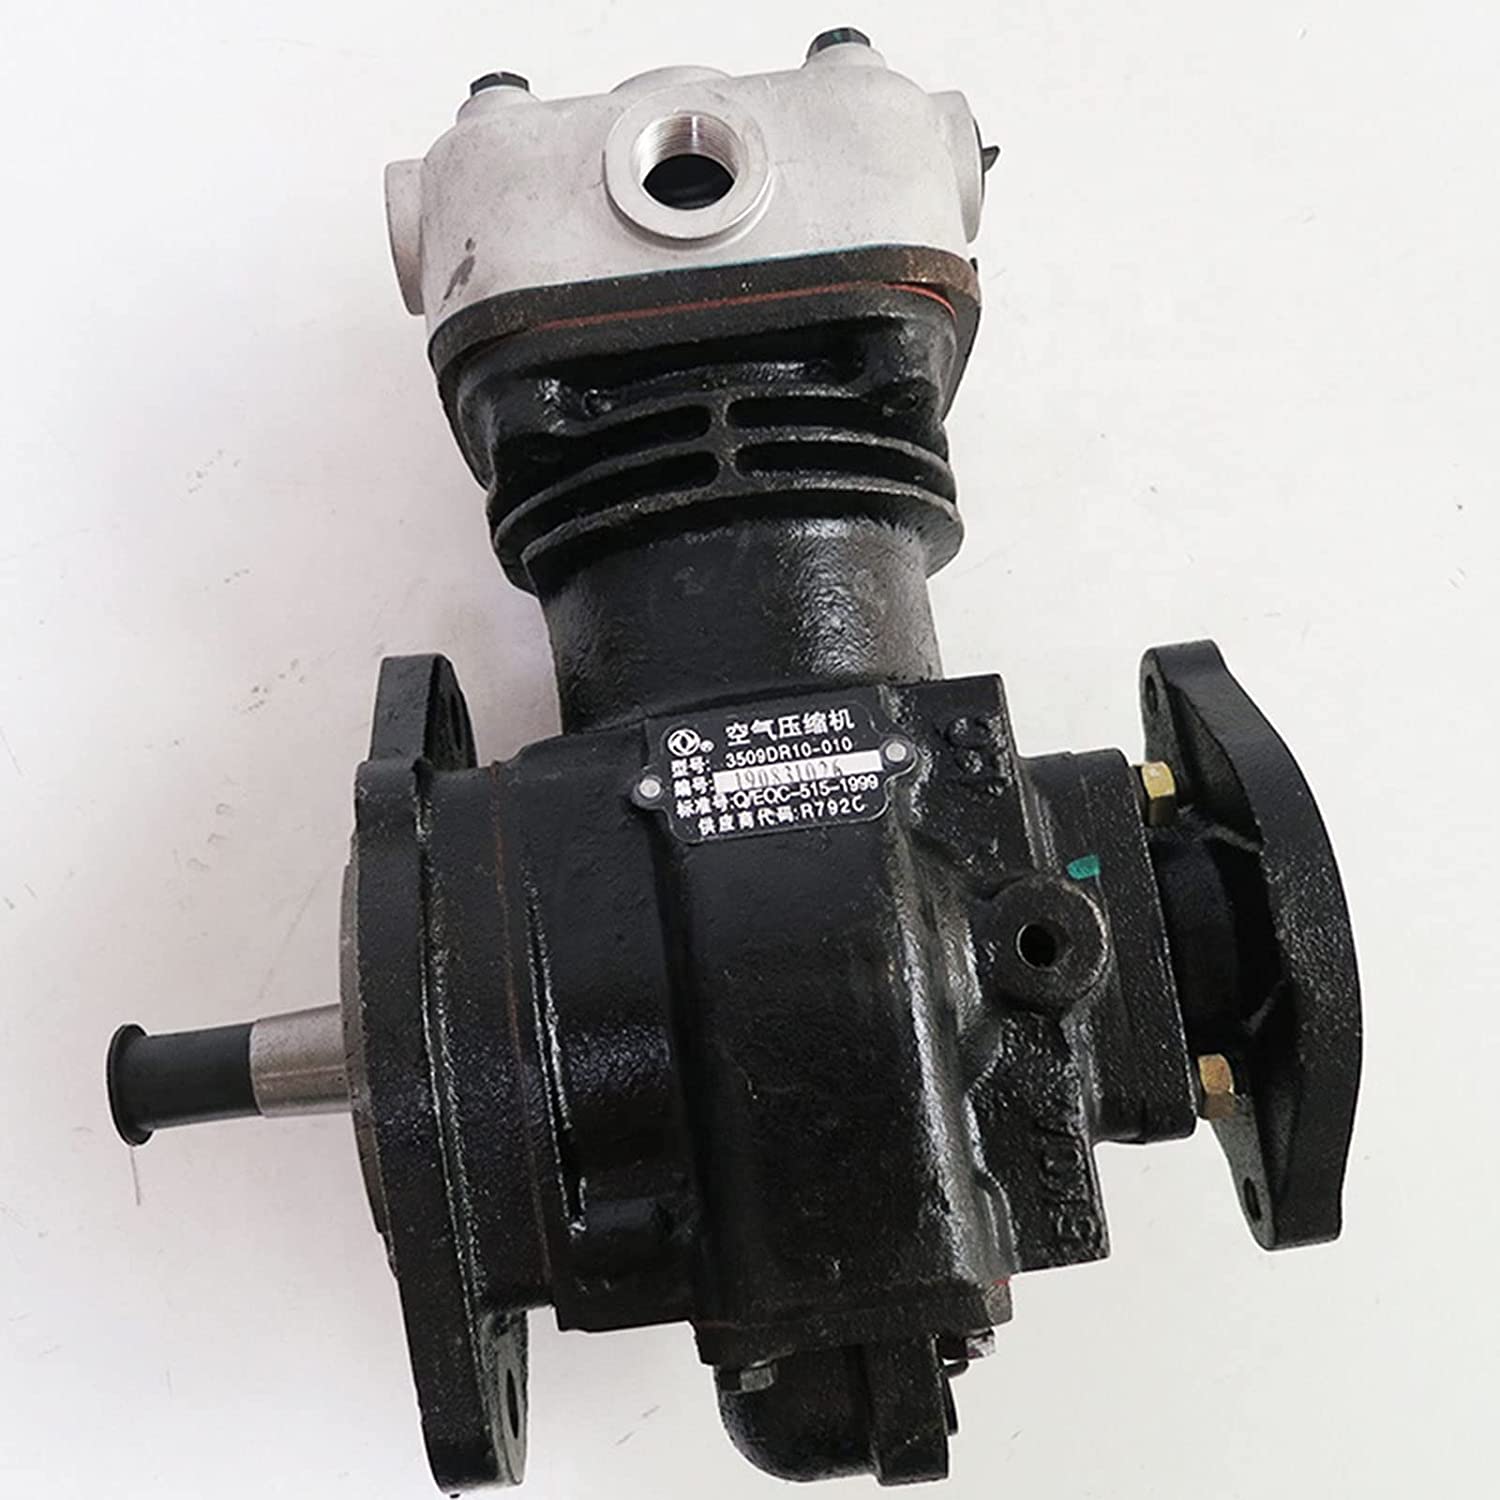 Seapple New Air Compressor Pump 3974548 A3974548 Compatible with Cummins 210/160 6BT 5.9L Diesel Engine - image 5 of 6